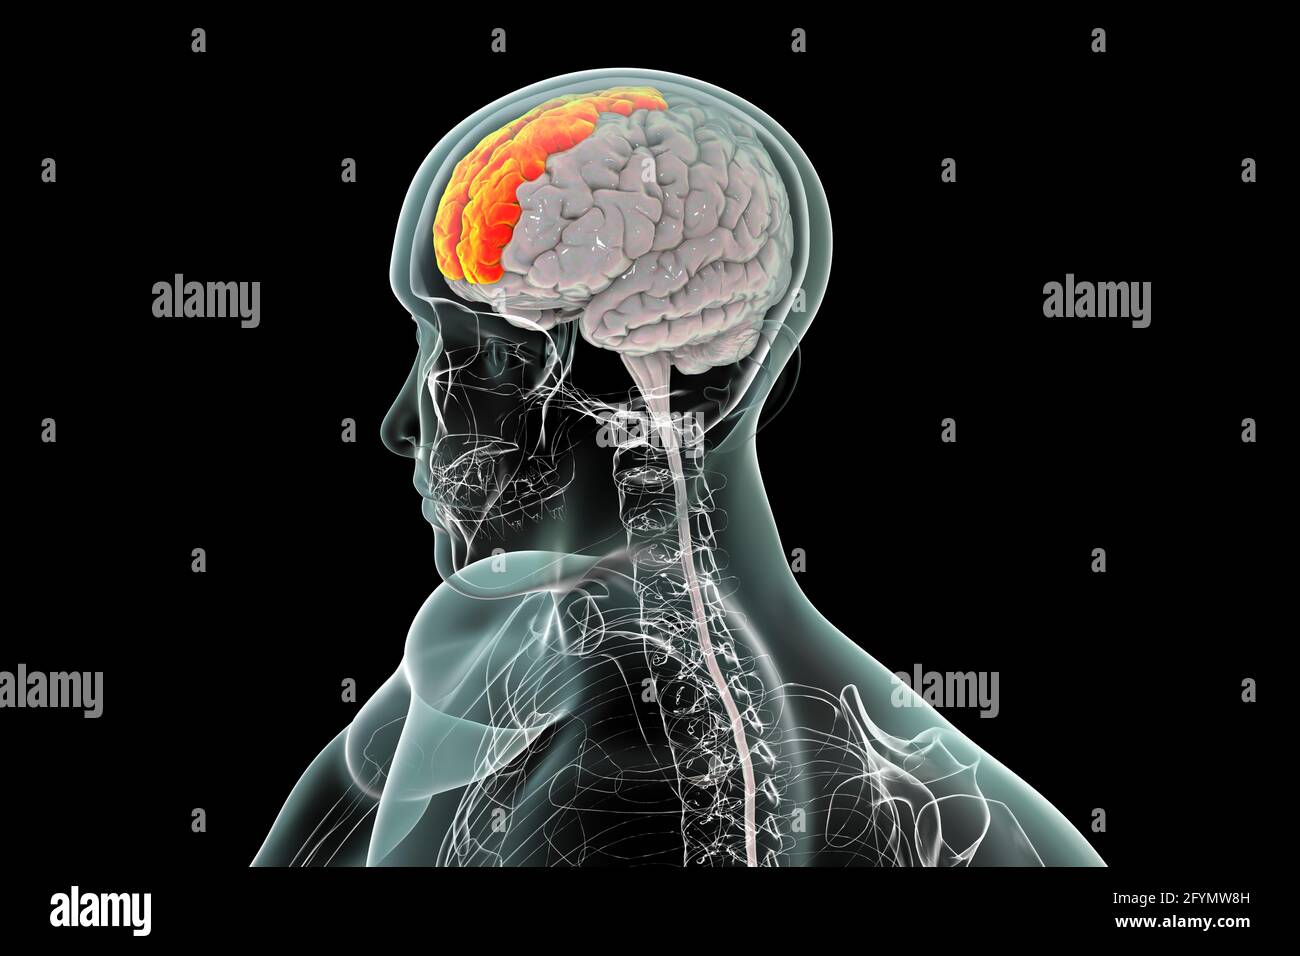 Brain with highlighted superior frontal gyri, illustration Stock Photo